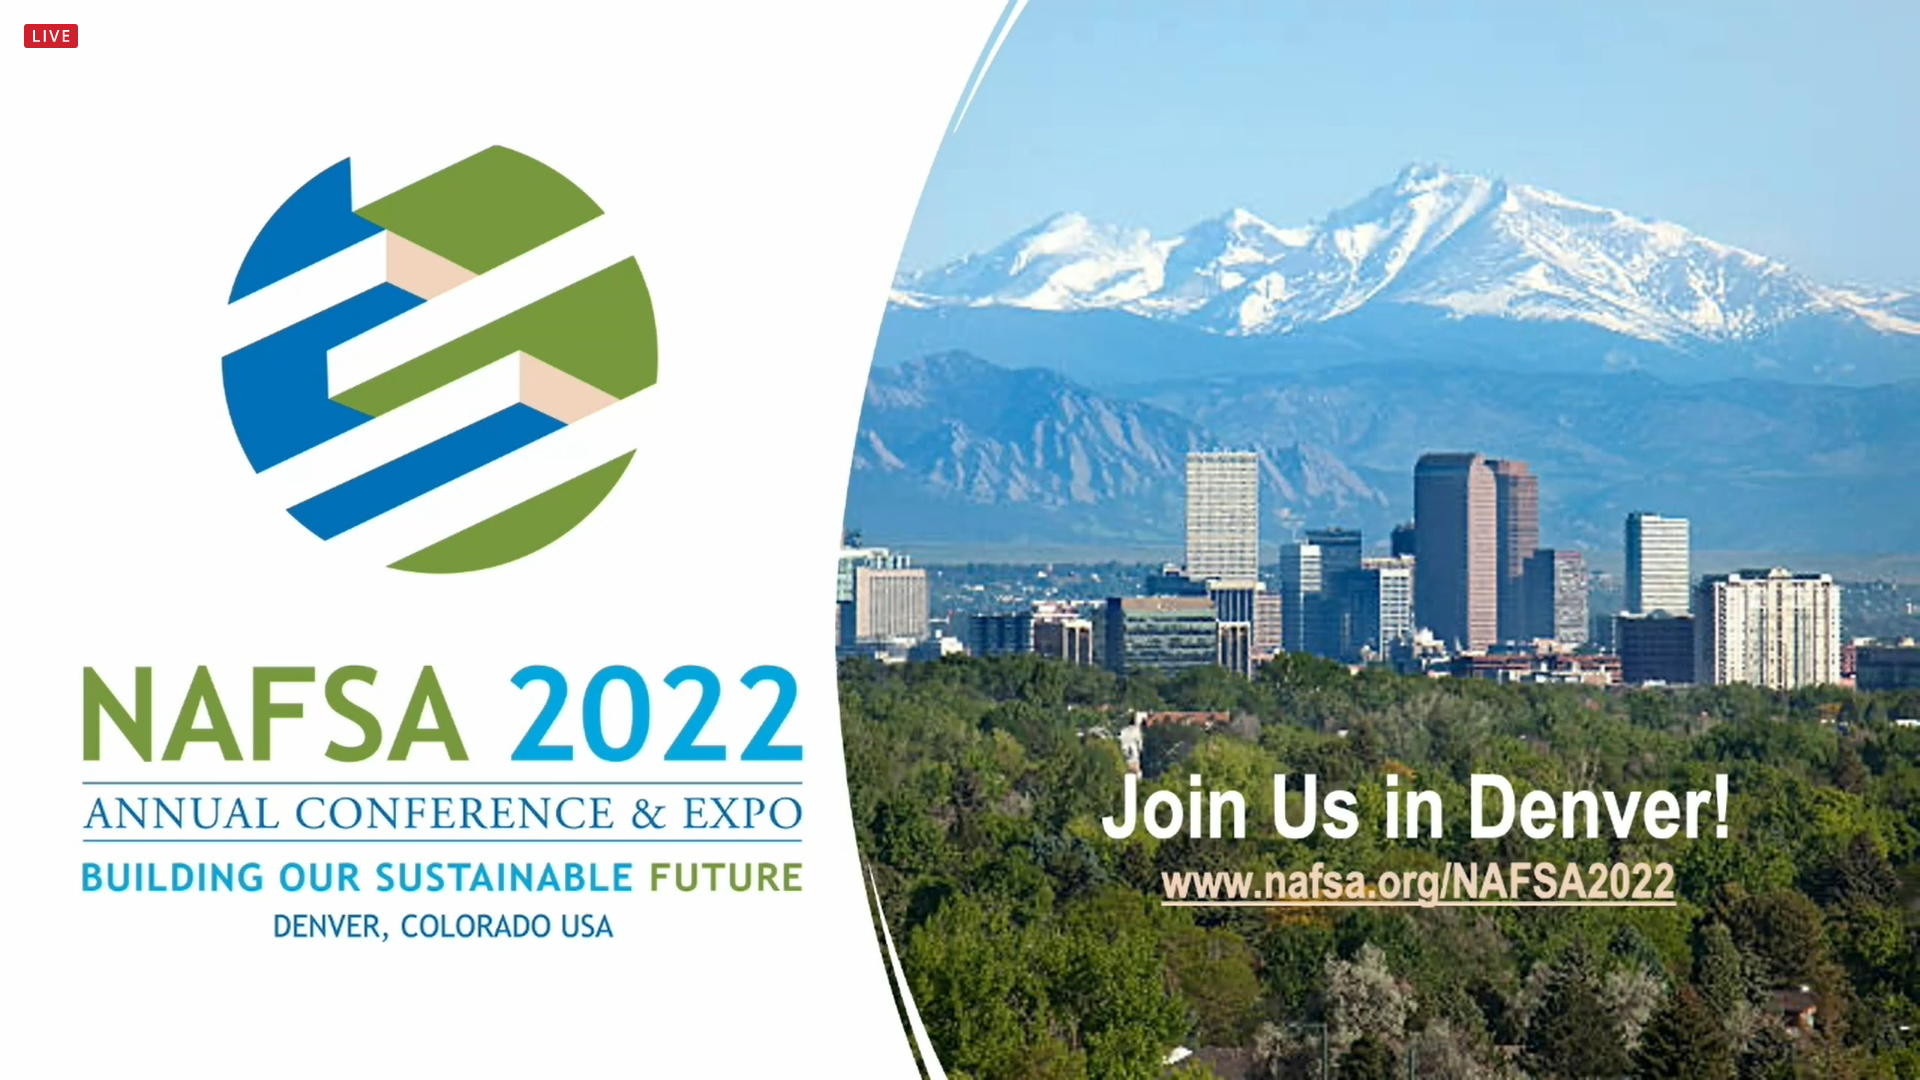 2022 NAFSA Annual Conference & Expo call for proposals